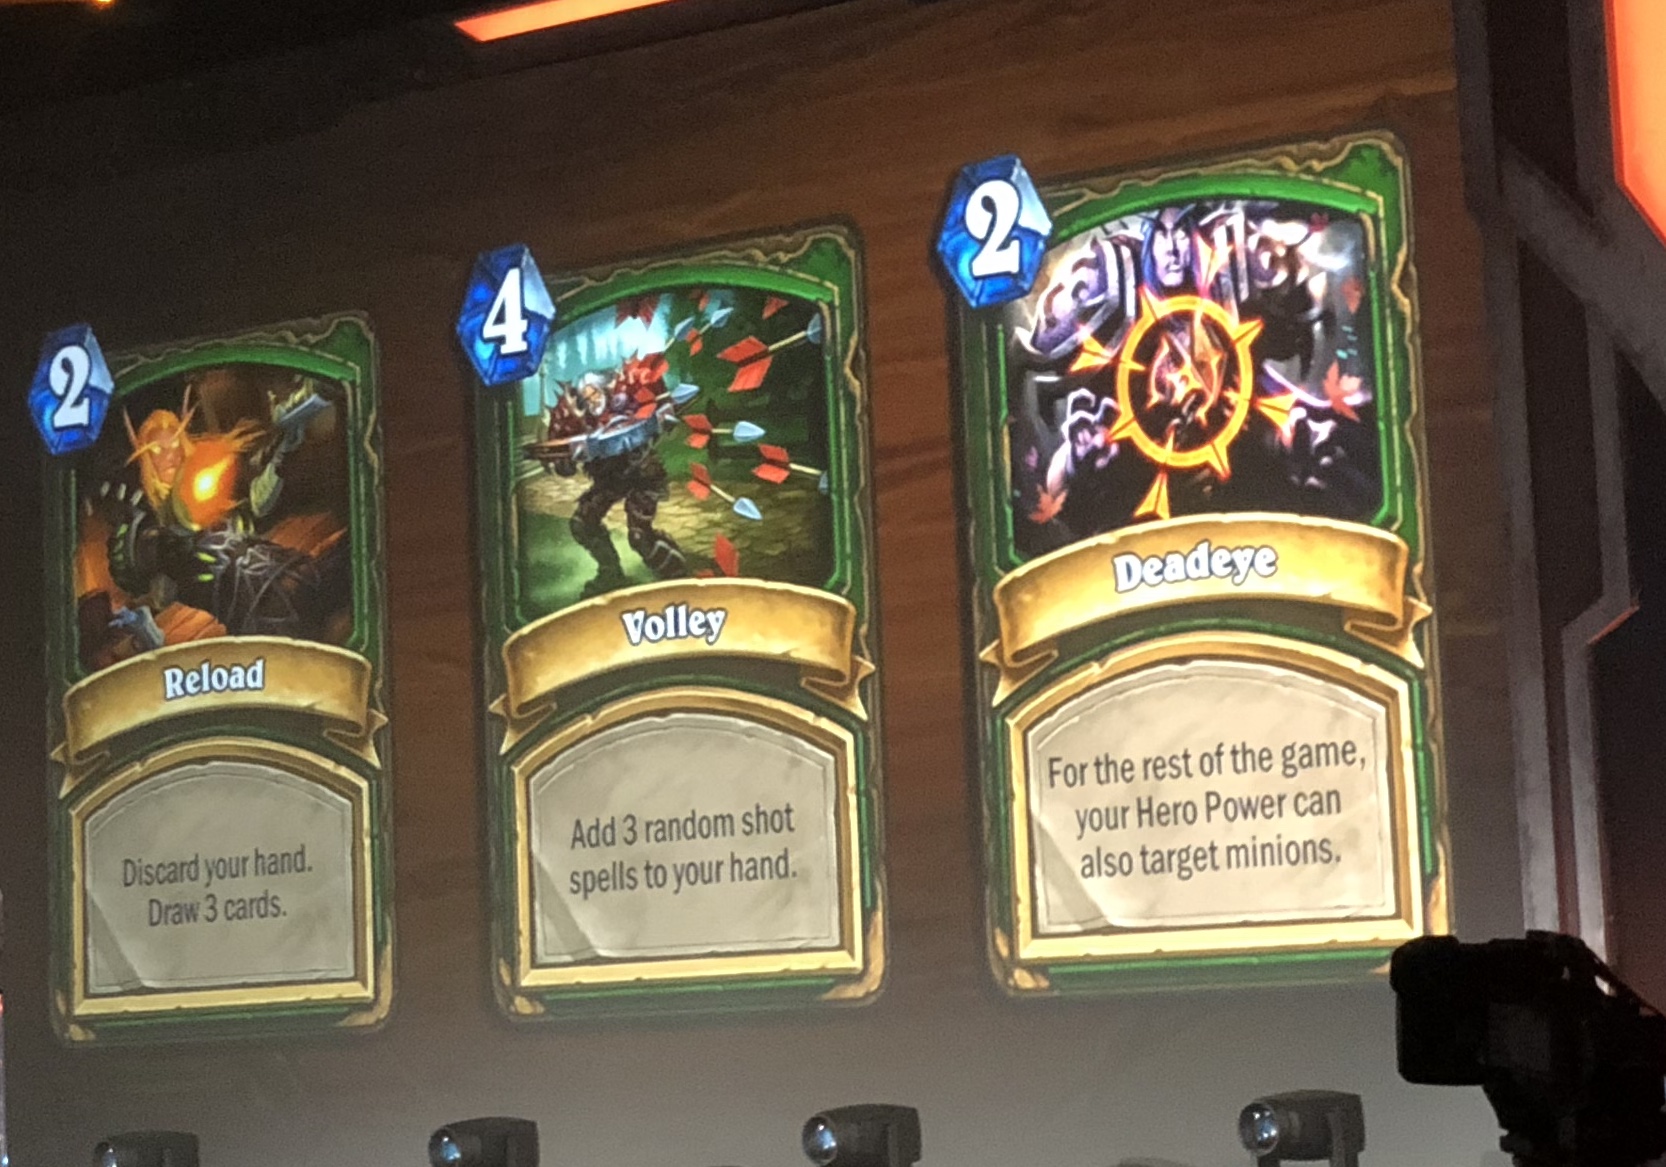 BlizzCon 2017 - New ?Hearthstone? Arena Cards Picked by Applause (or Yells)